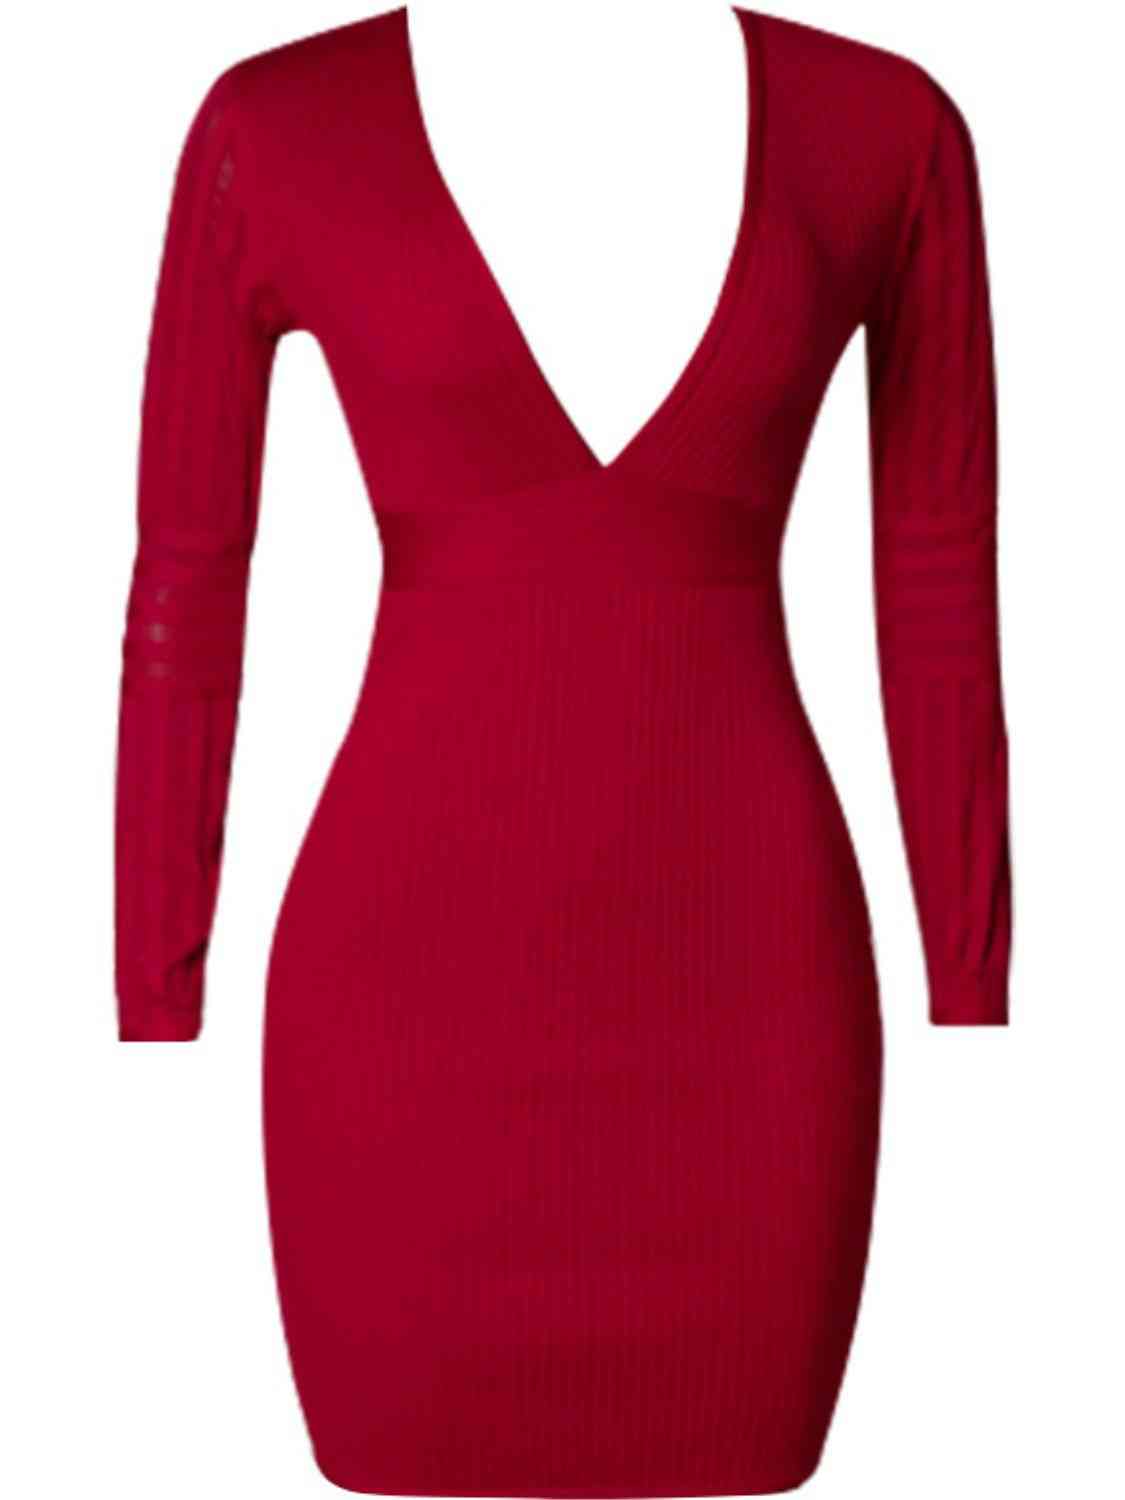 Most Likely Mini Bandage Dress - Texture Love and Tangle 